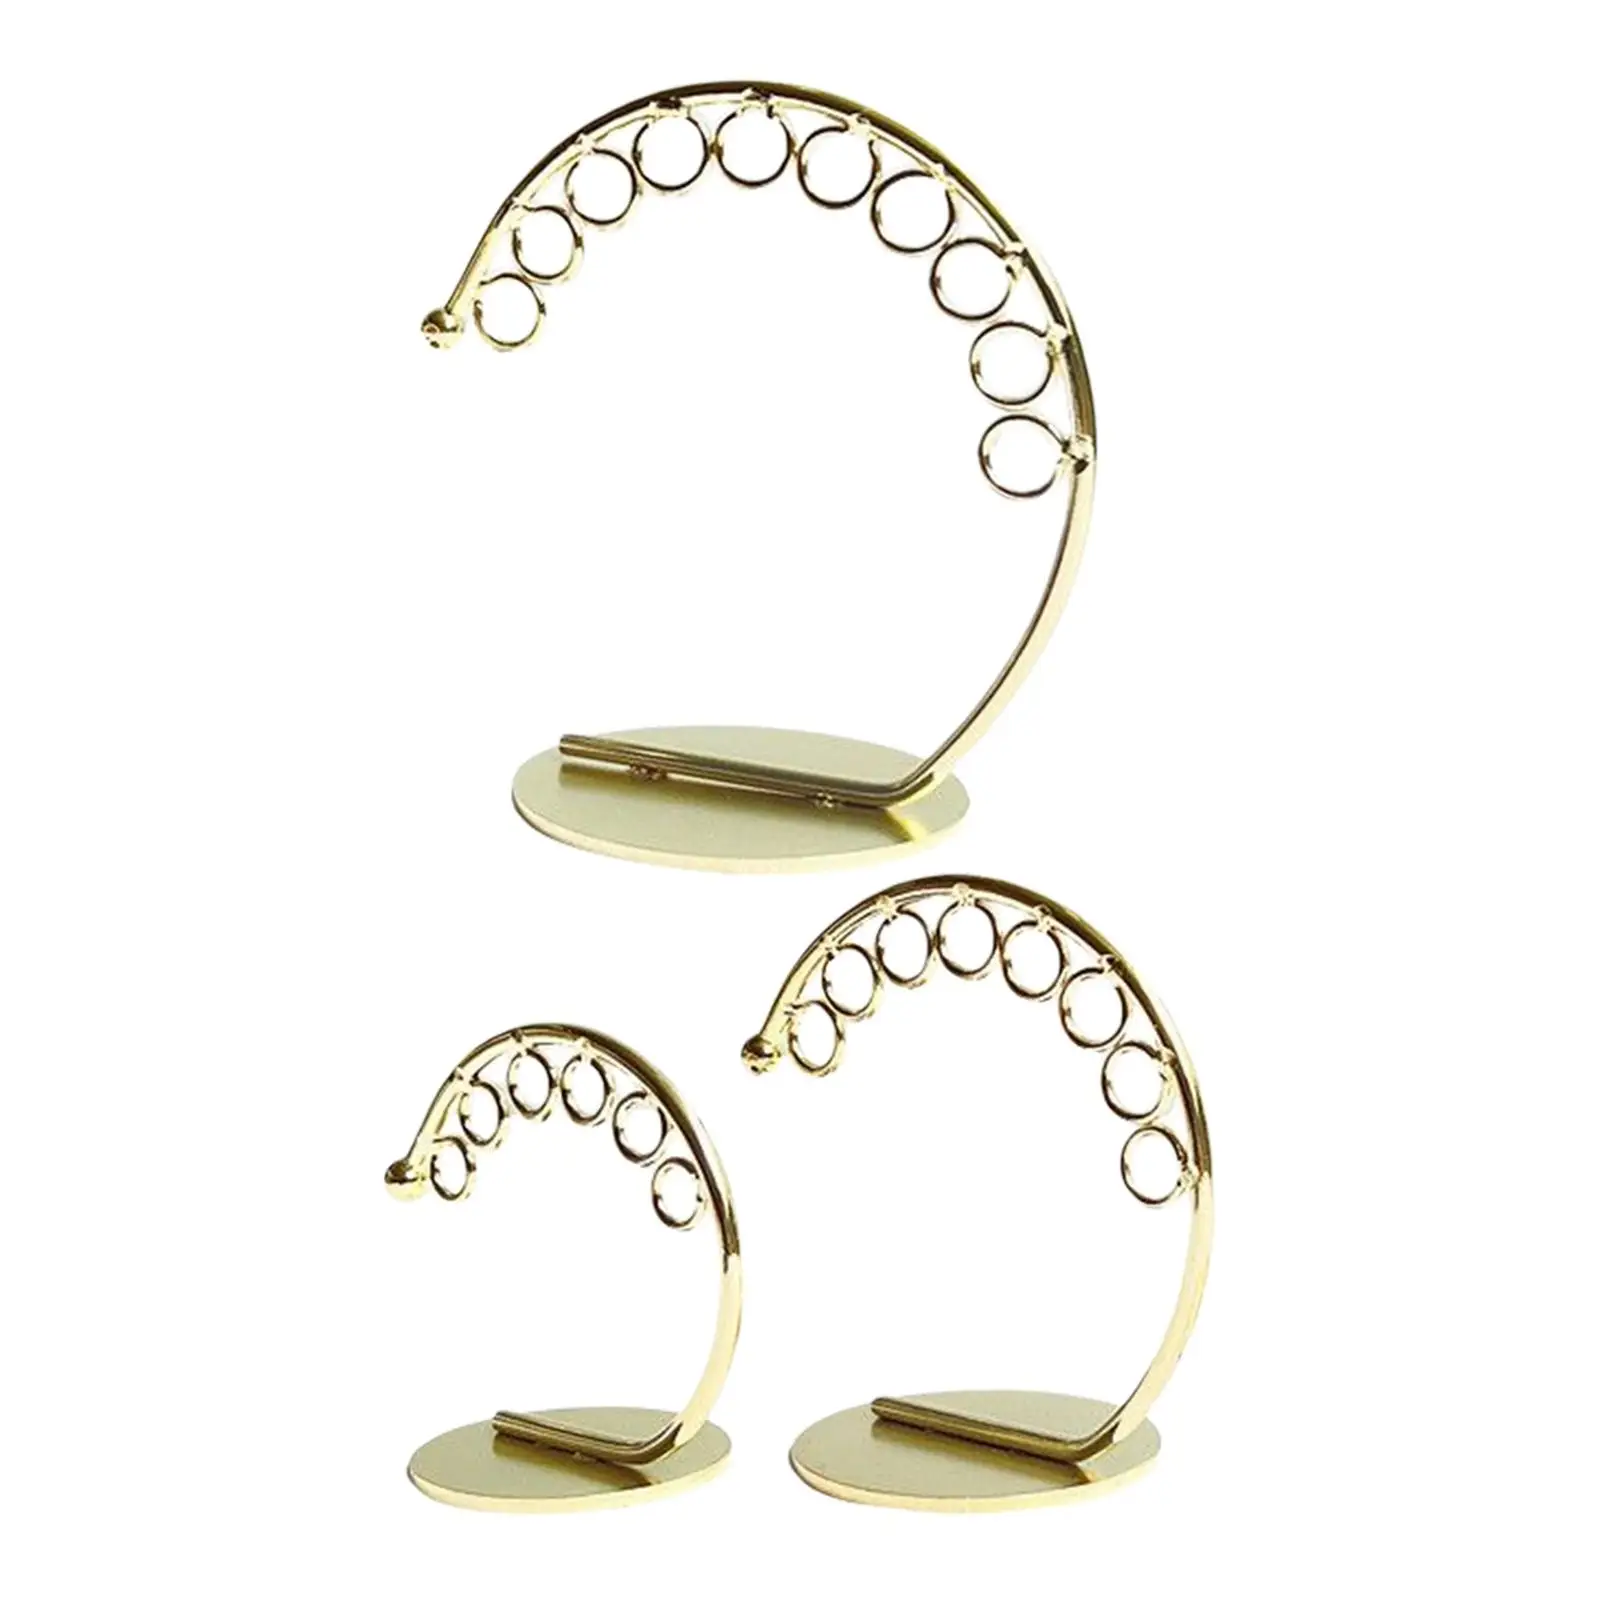 3x Metal Earring Stand Jewelry Organizer Display Holder for Photography Props Decor Crafts